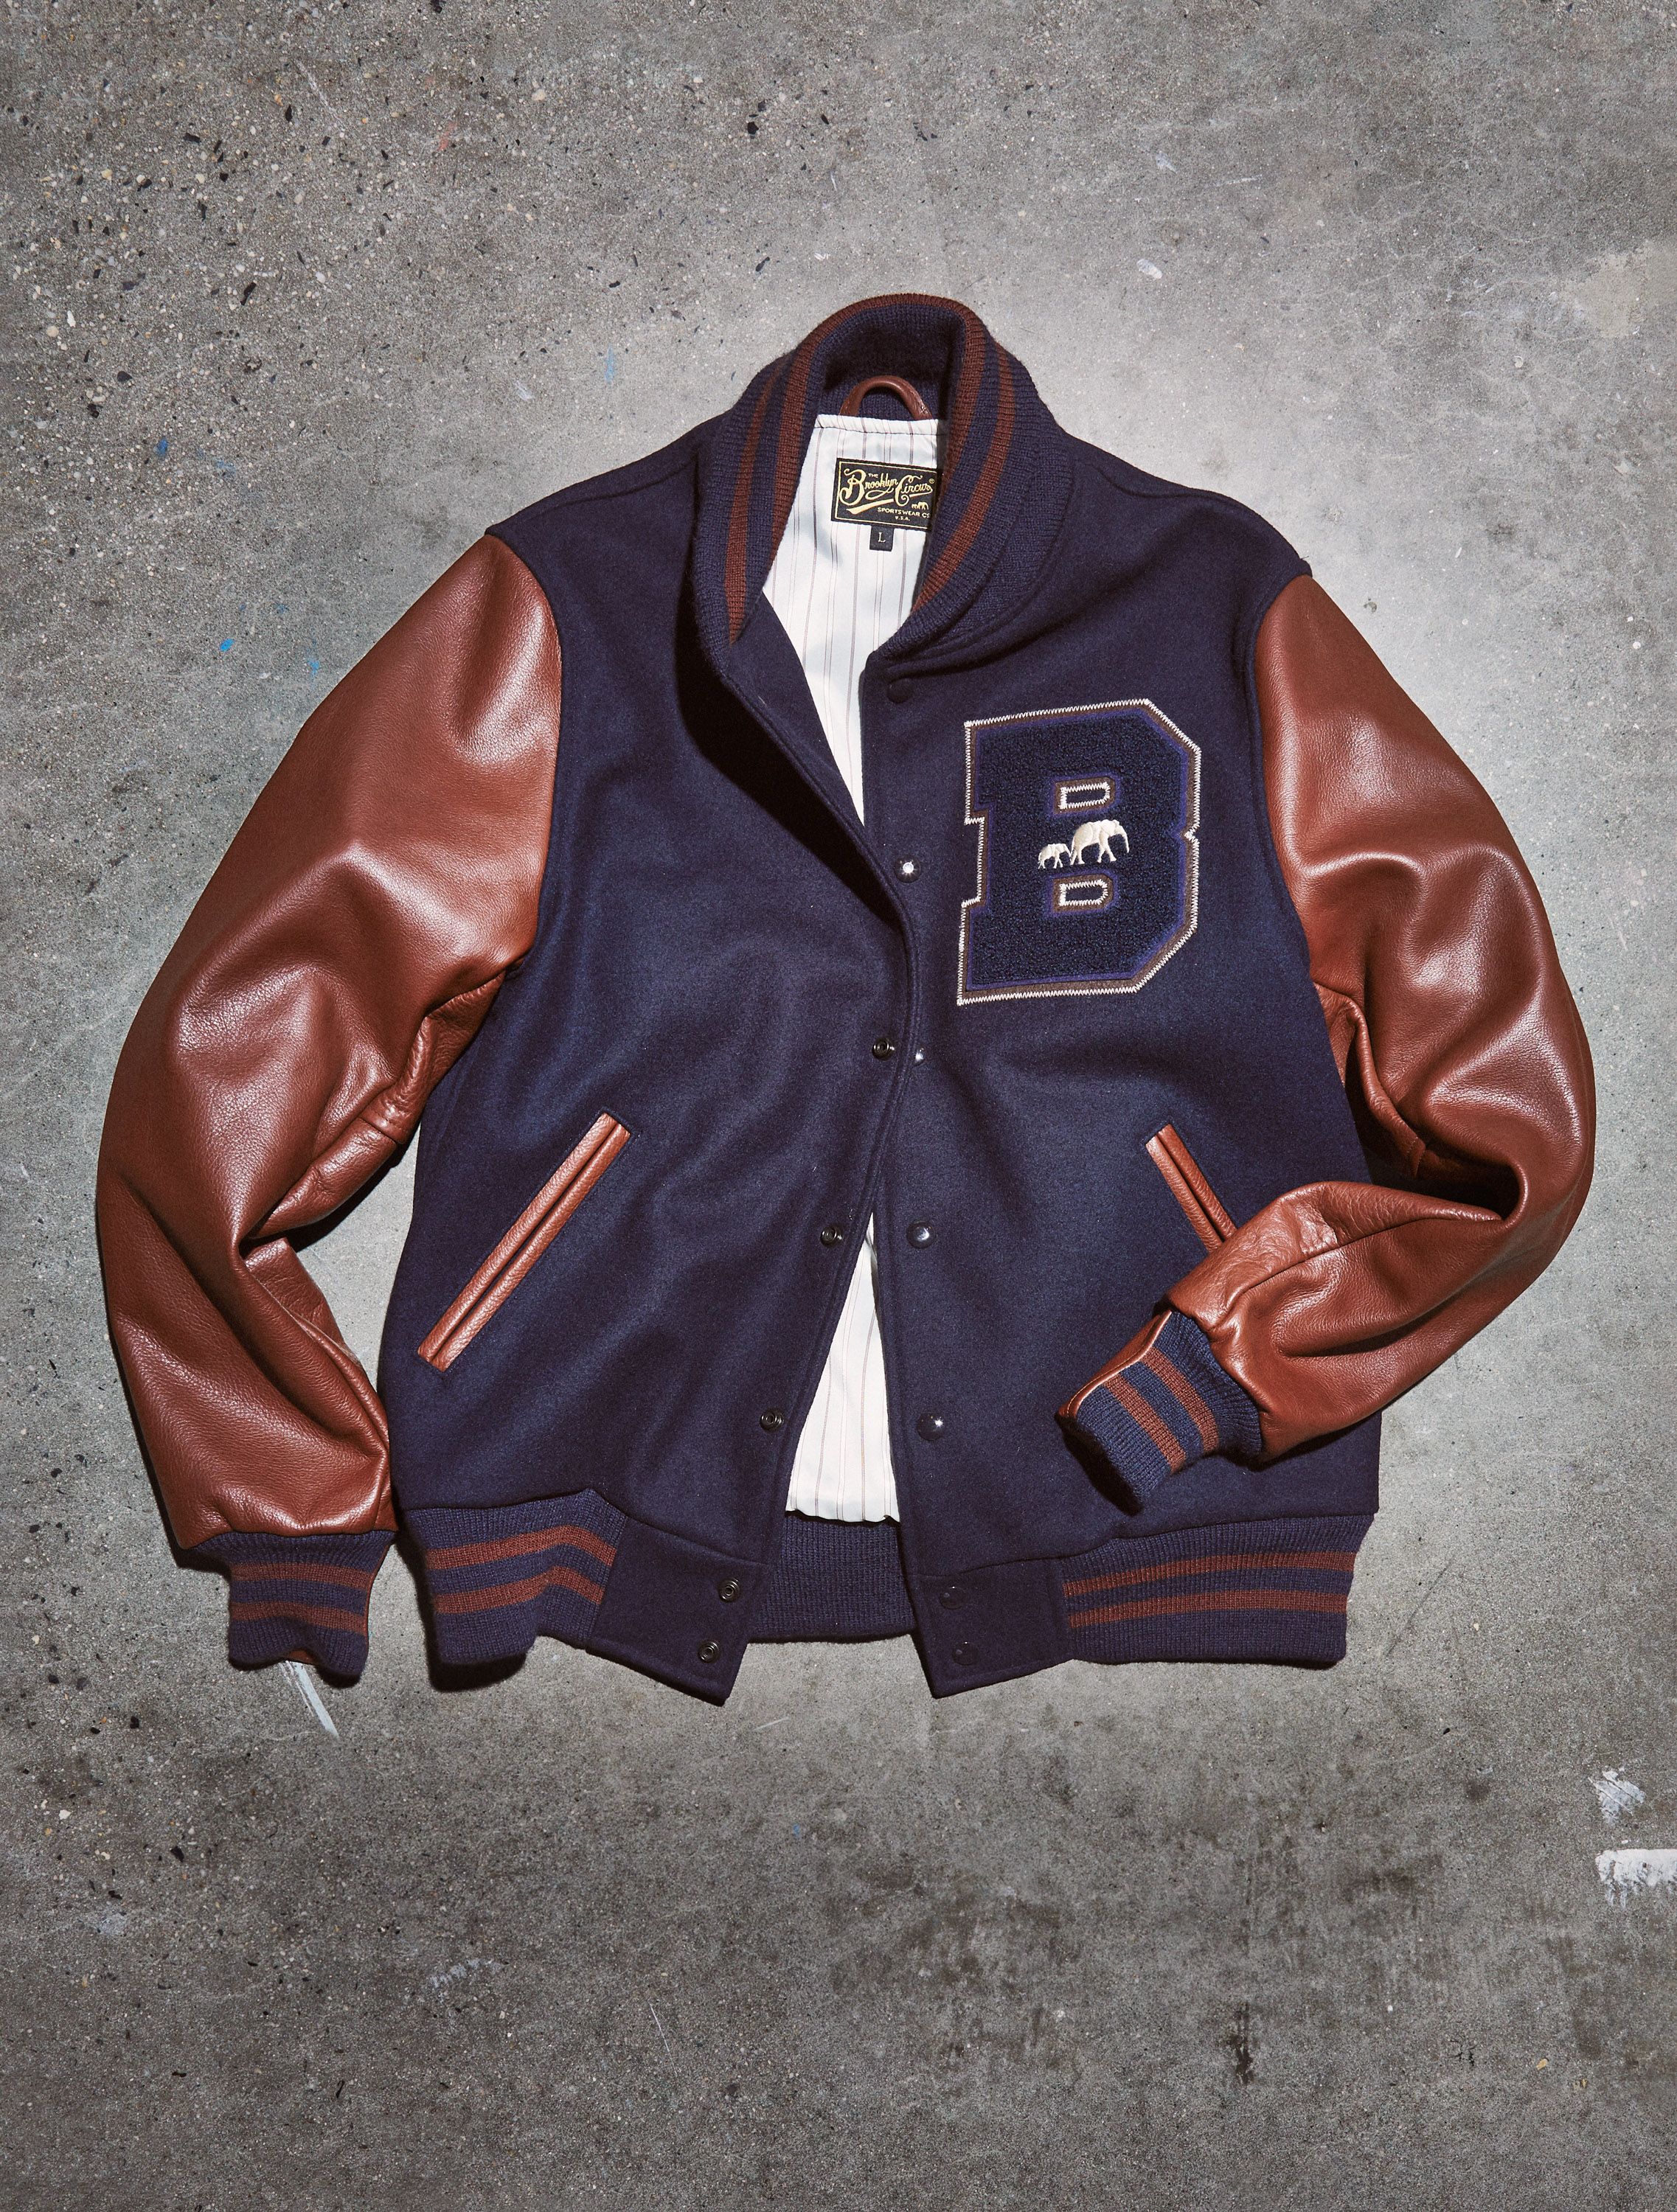 Jock or Not, The Varsity Jacket Trend is For All